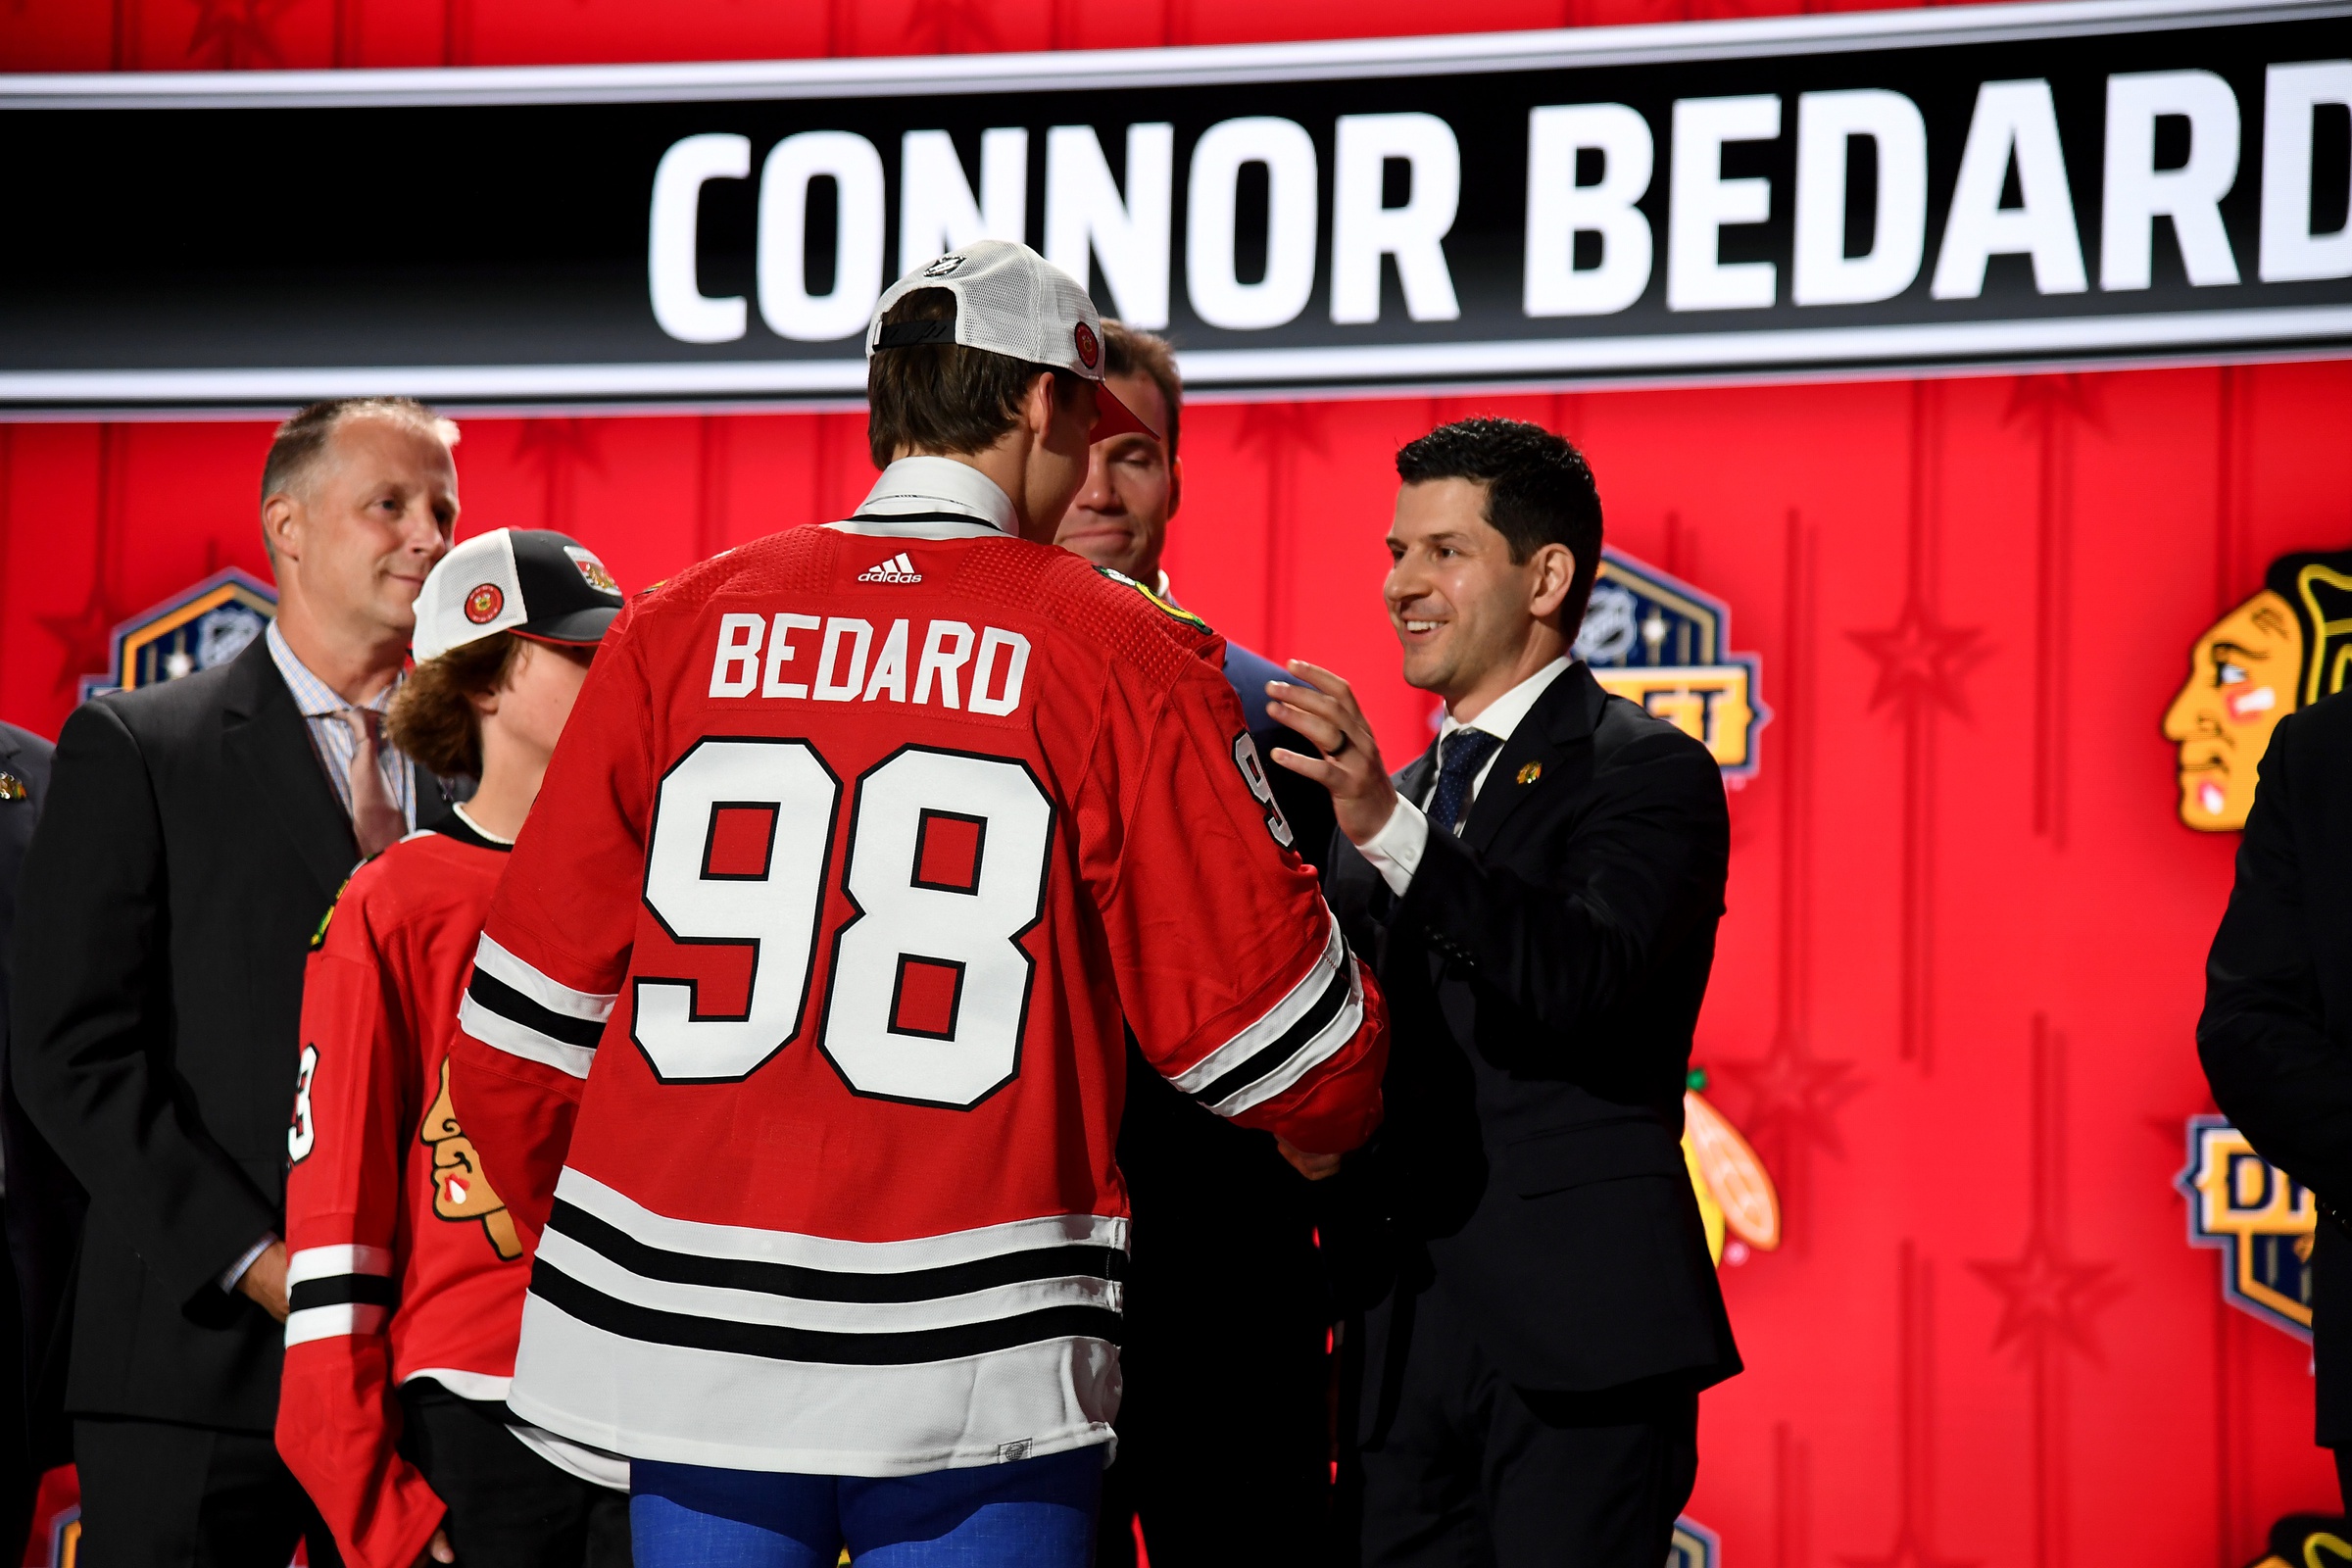 Connor Bedard is Inevitable at the World Juniors - The Hockey News